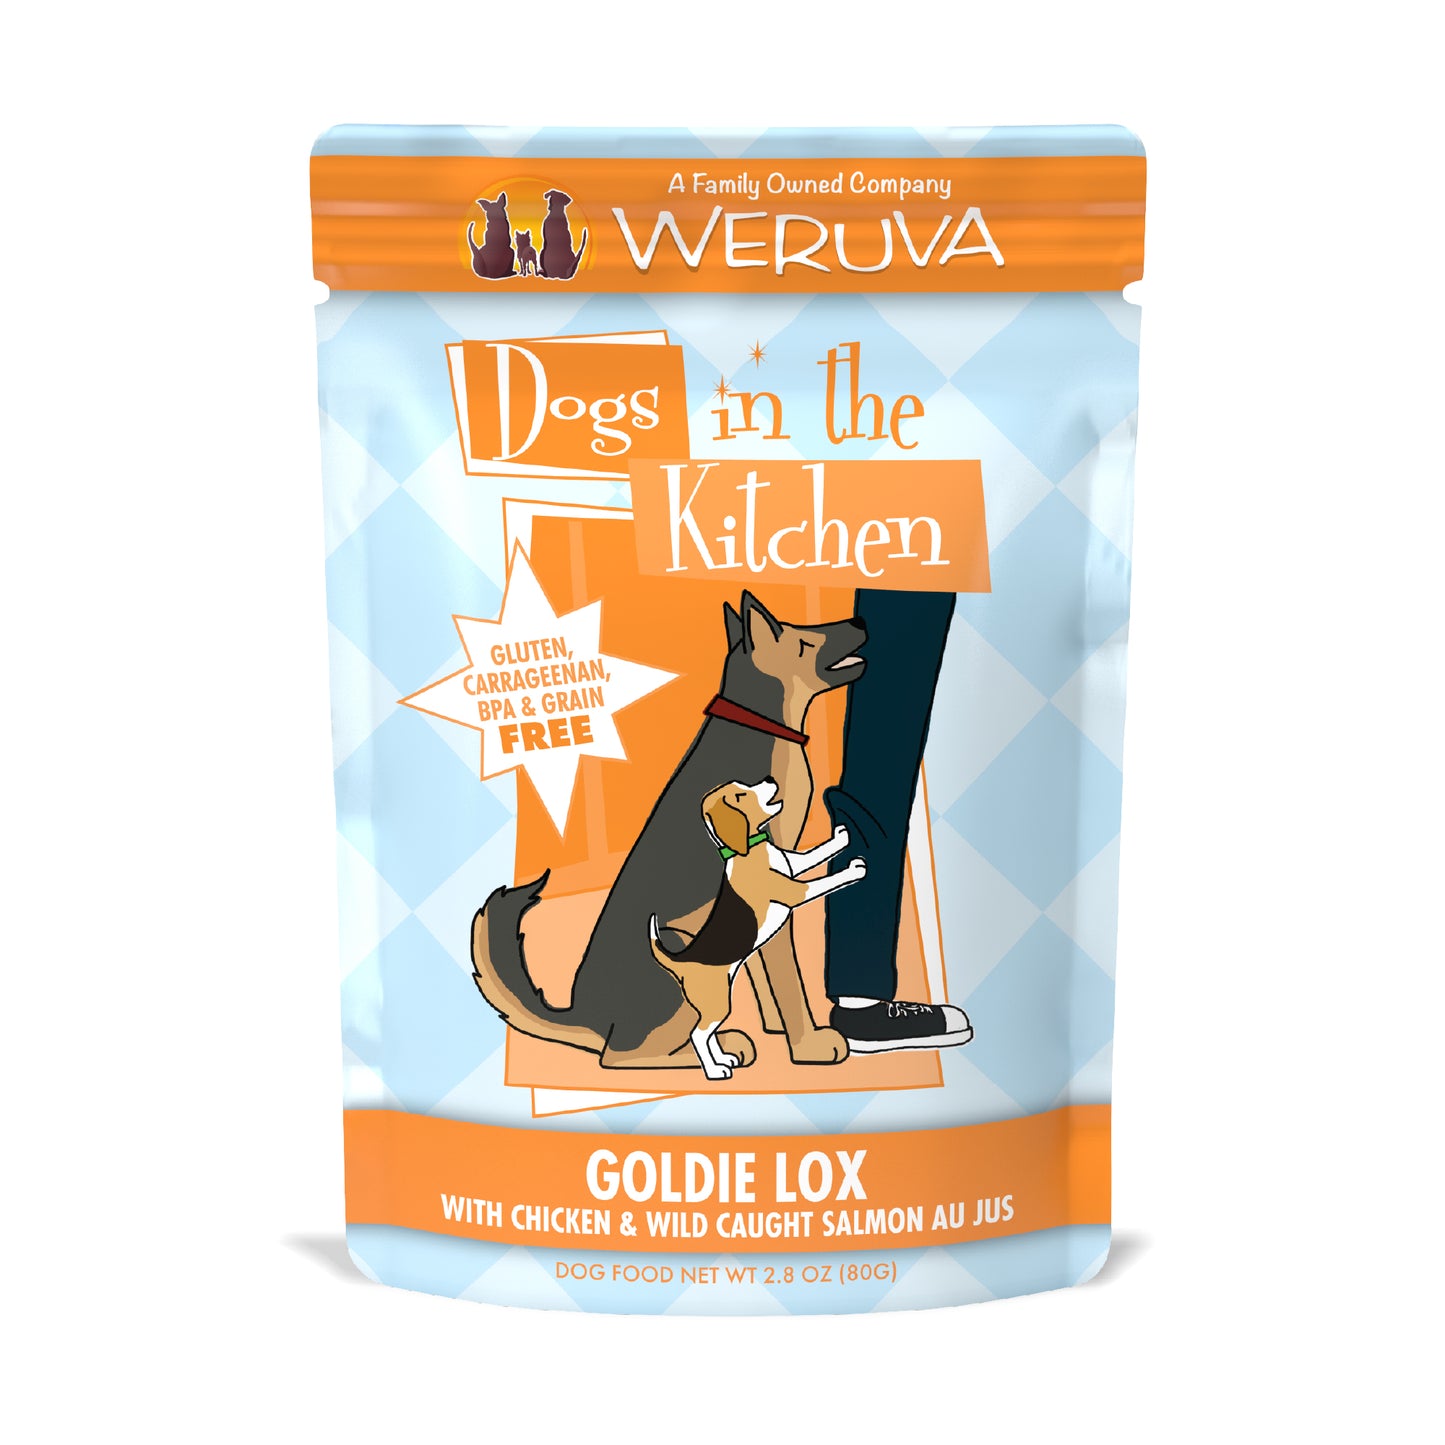 Dogs in the Kitchen "Goldie Lox" with Chicken & Wild-Caught Salmon Au Jus (2.8 oz Pouch)